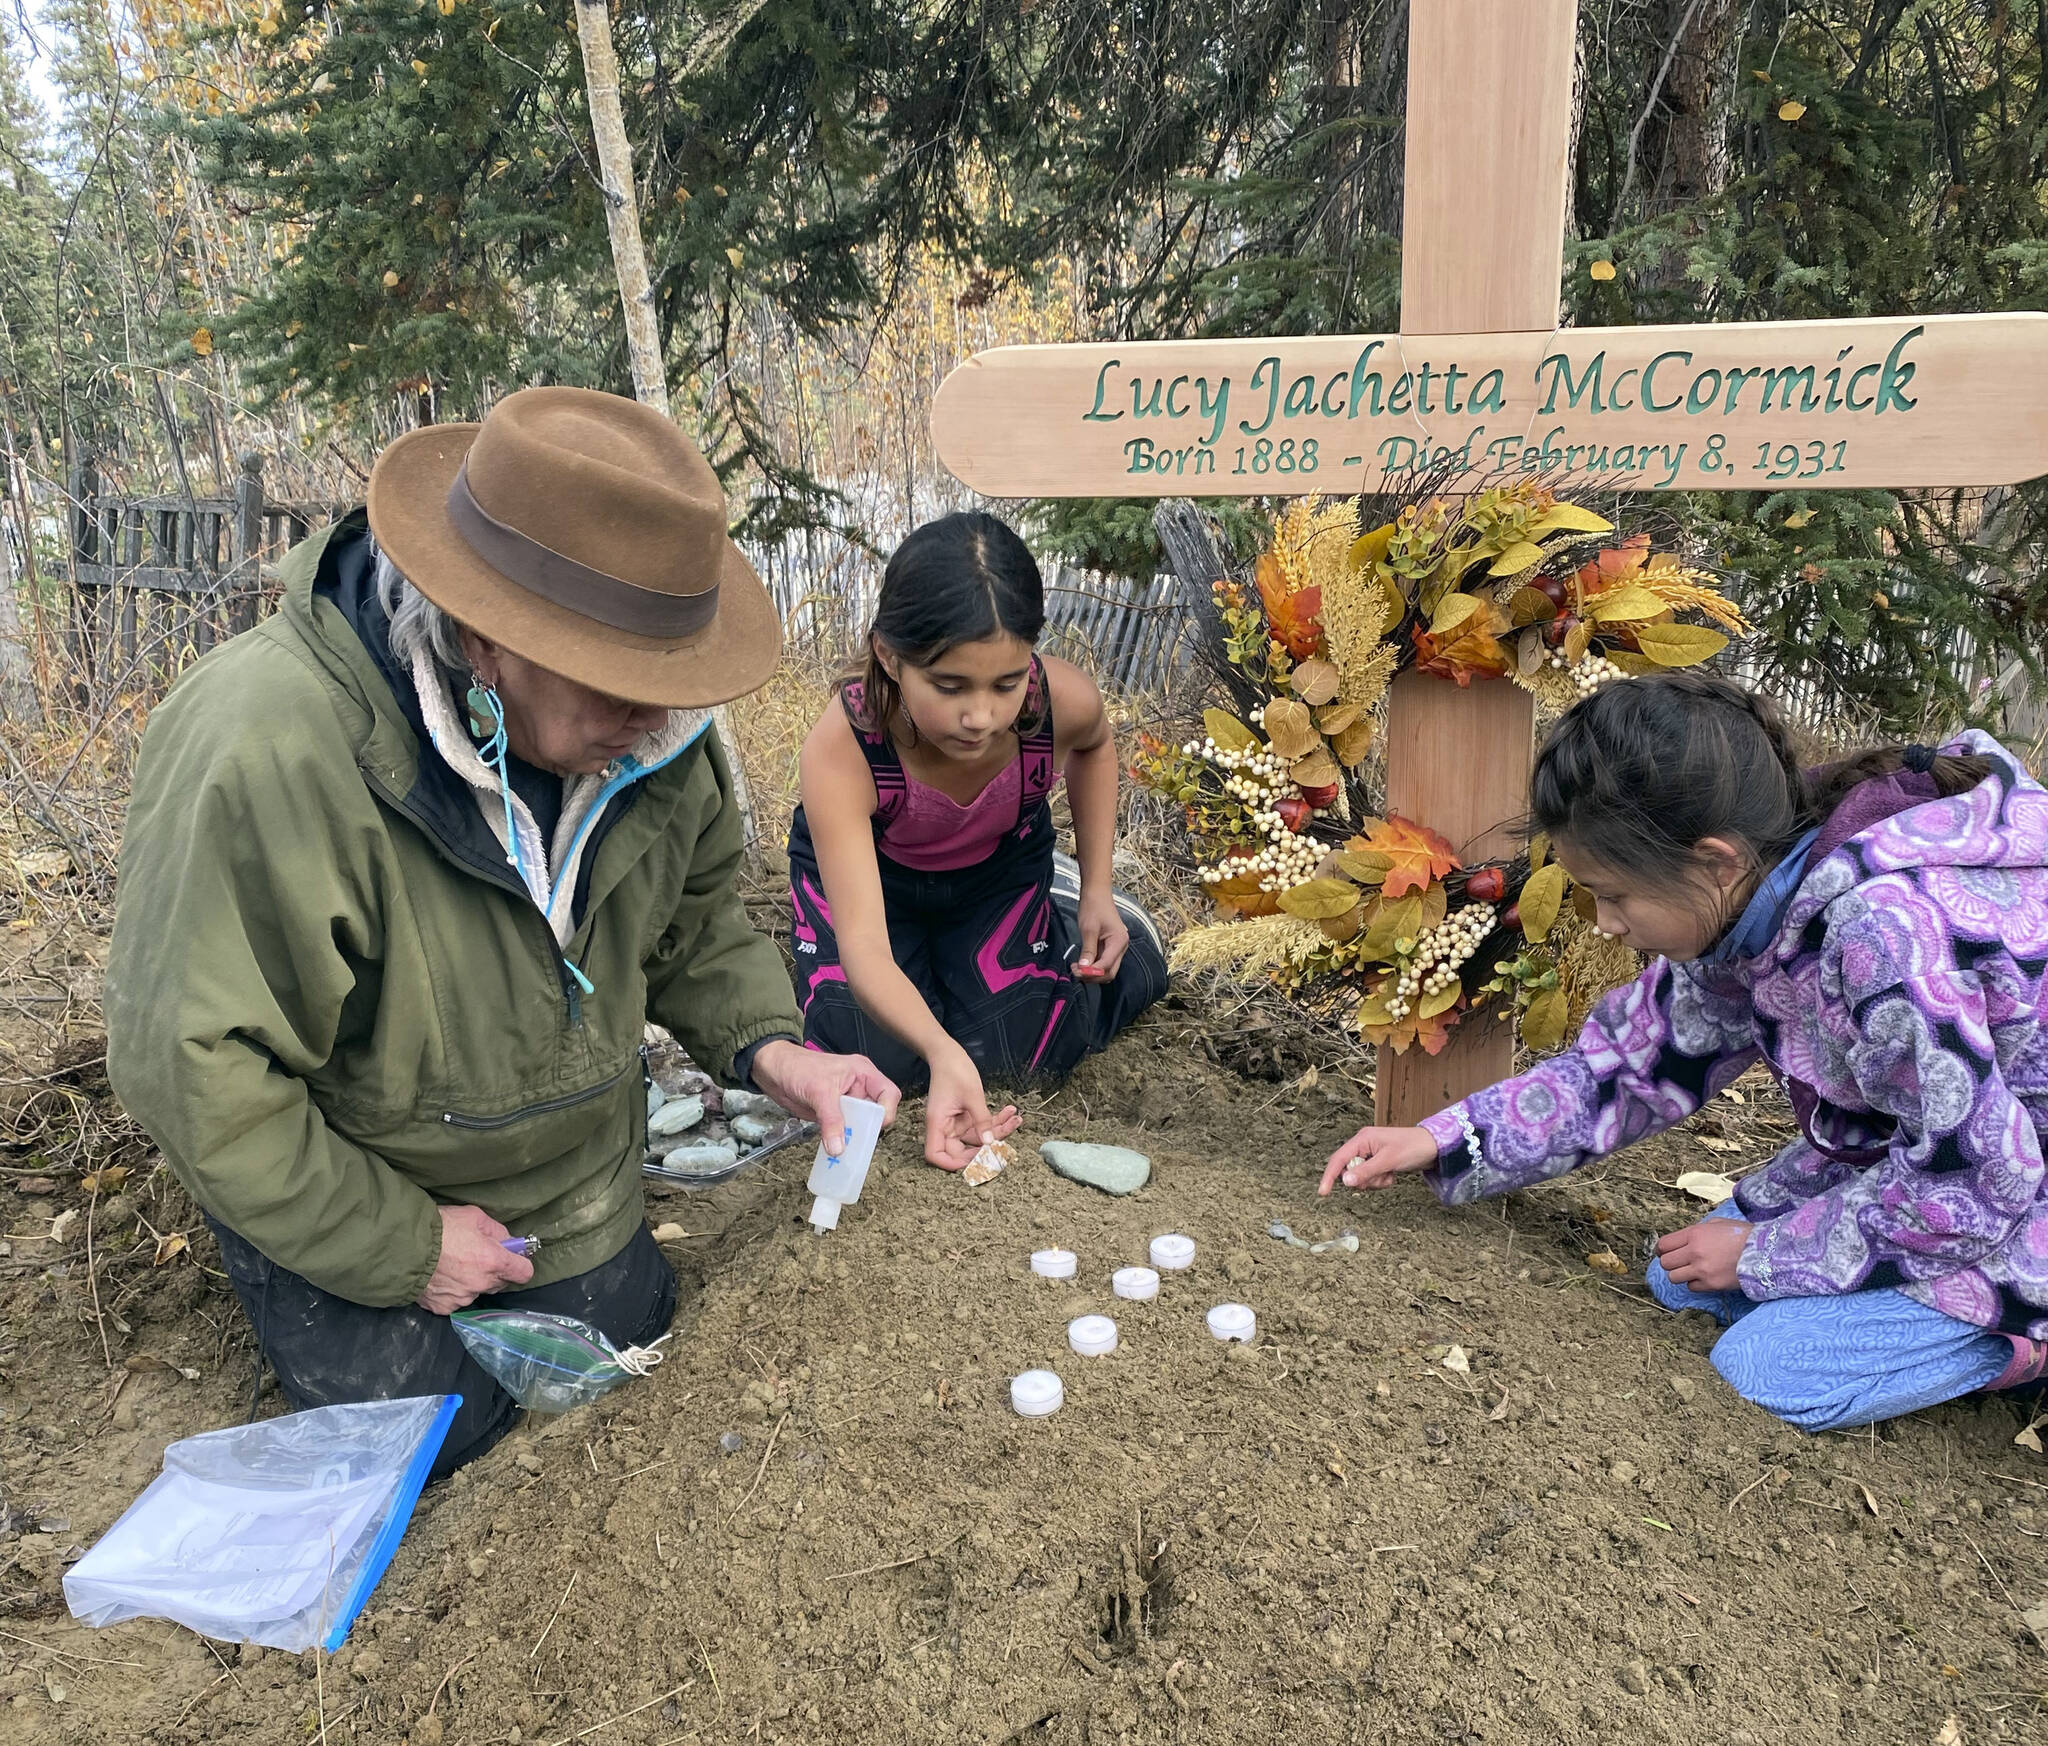 In this Sept. 29, 2023, photo at the grave of Lucky Pitka McCormick, her granddaughter Kathleen Carlo, left, and McCormick’s great-great-grandchildren Lucia, center, and Addison Carlo place candles and stones on the grave during a reburial ceremony in Rampart, Alaska. Pitka was one of the Lost Alaskans sent to a mental hospital in the 1930s. Her grave was recently discovered, and family members brought her back to Alaska for a proper burial. (Wally Carlo via AP).